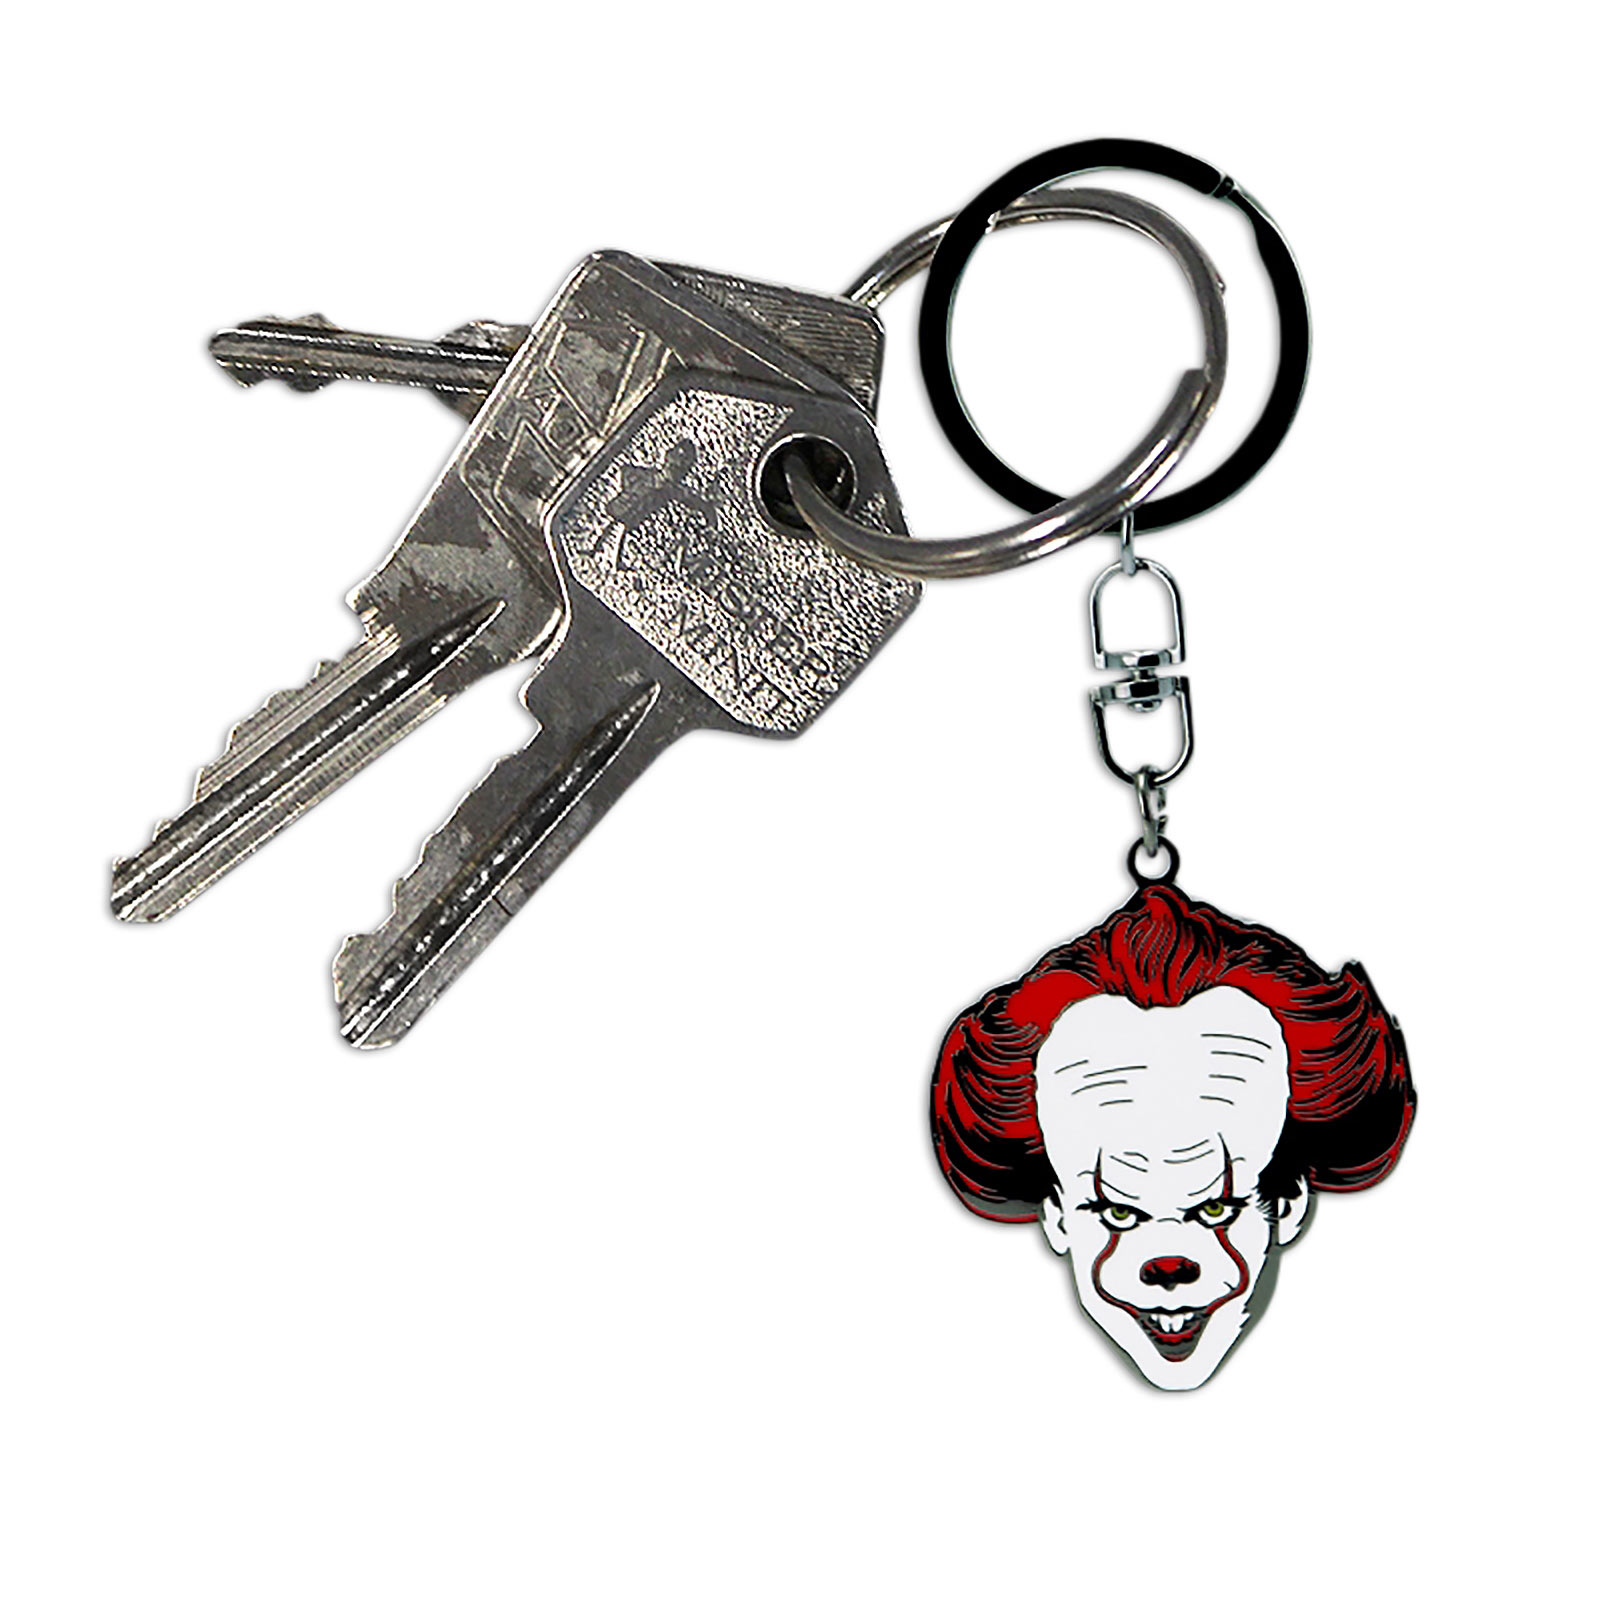 Stephen King's IT - Pennywise Keychain